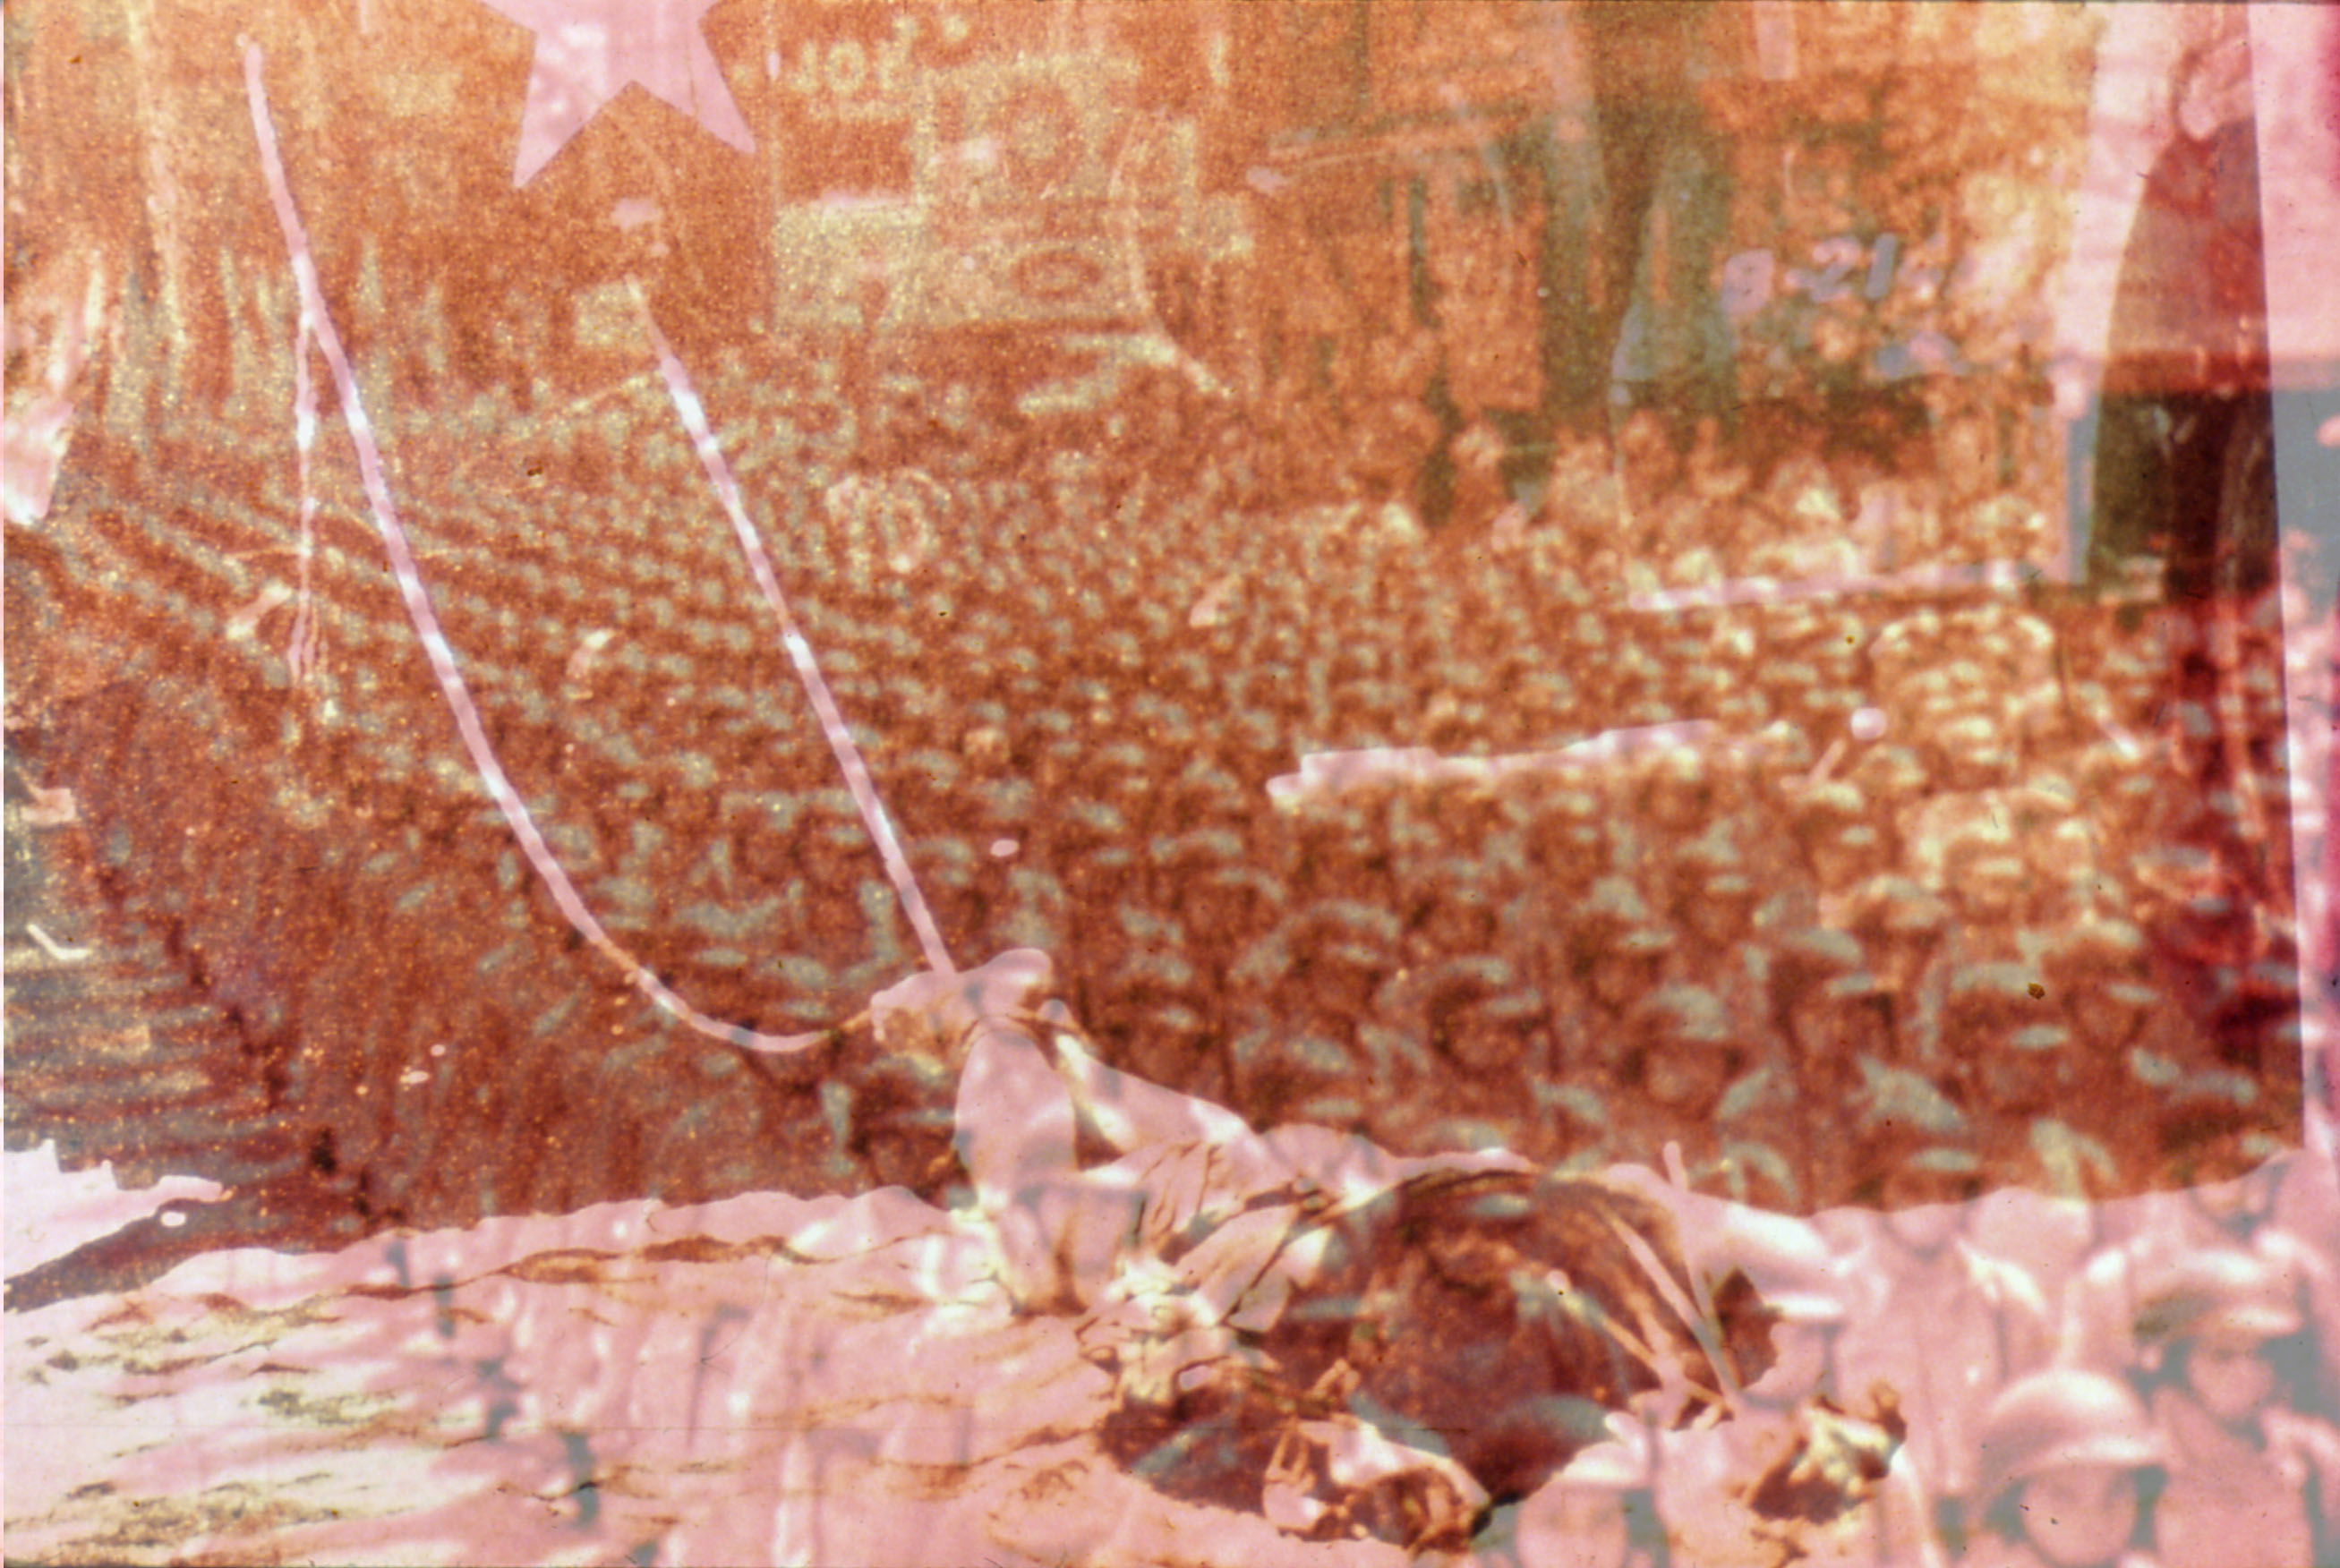 collage image; at the forground is a figure laying face down, bound at the ankles; behind that is an image of a vast army marching; overlaying both is a pink filter with elements reminiscent of the american flag